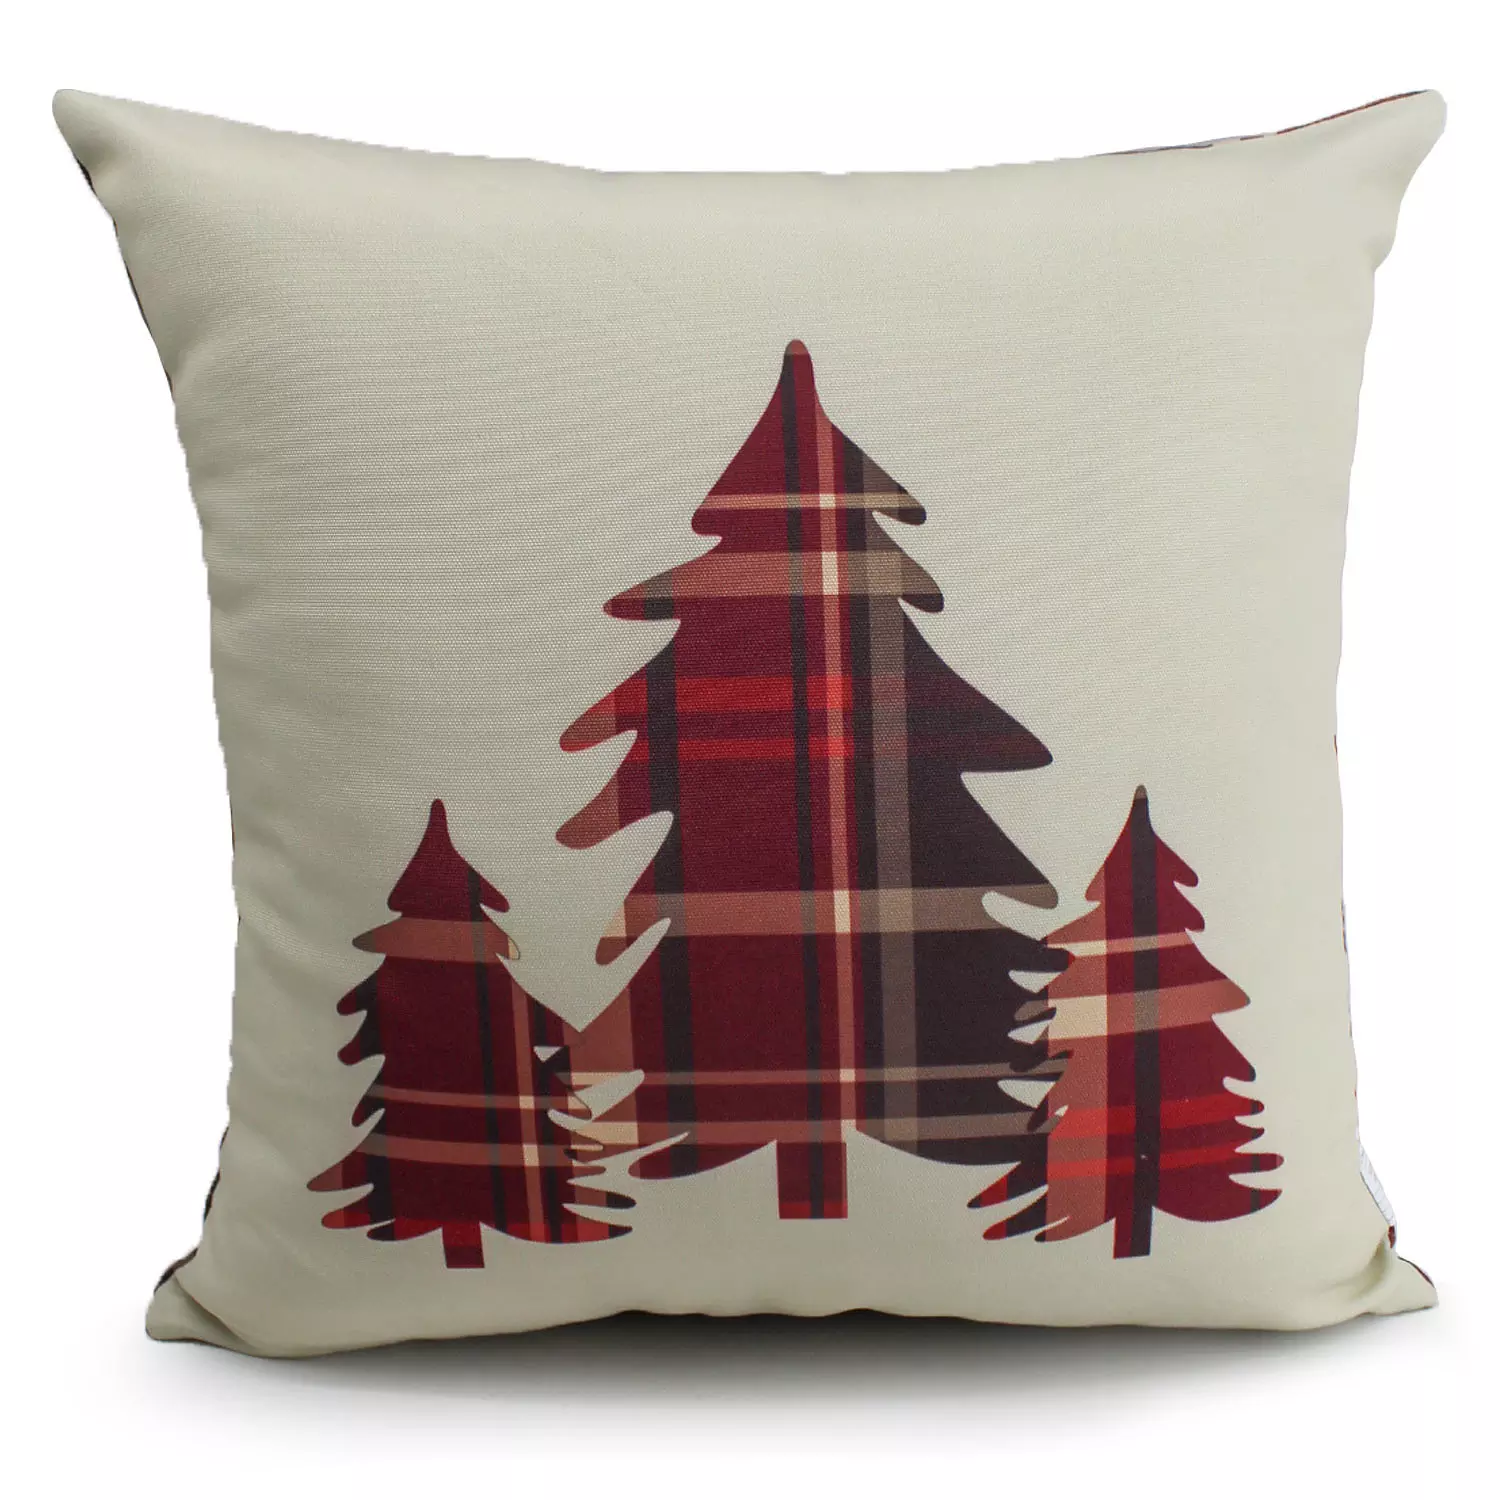 Printed decorative cushion with plaid trees front and matching plaid back, 18"x18", red